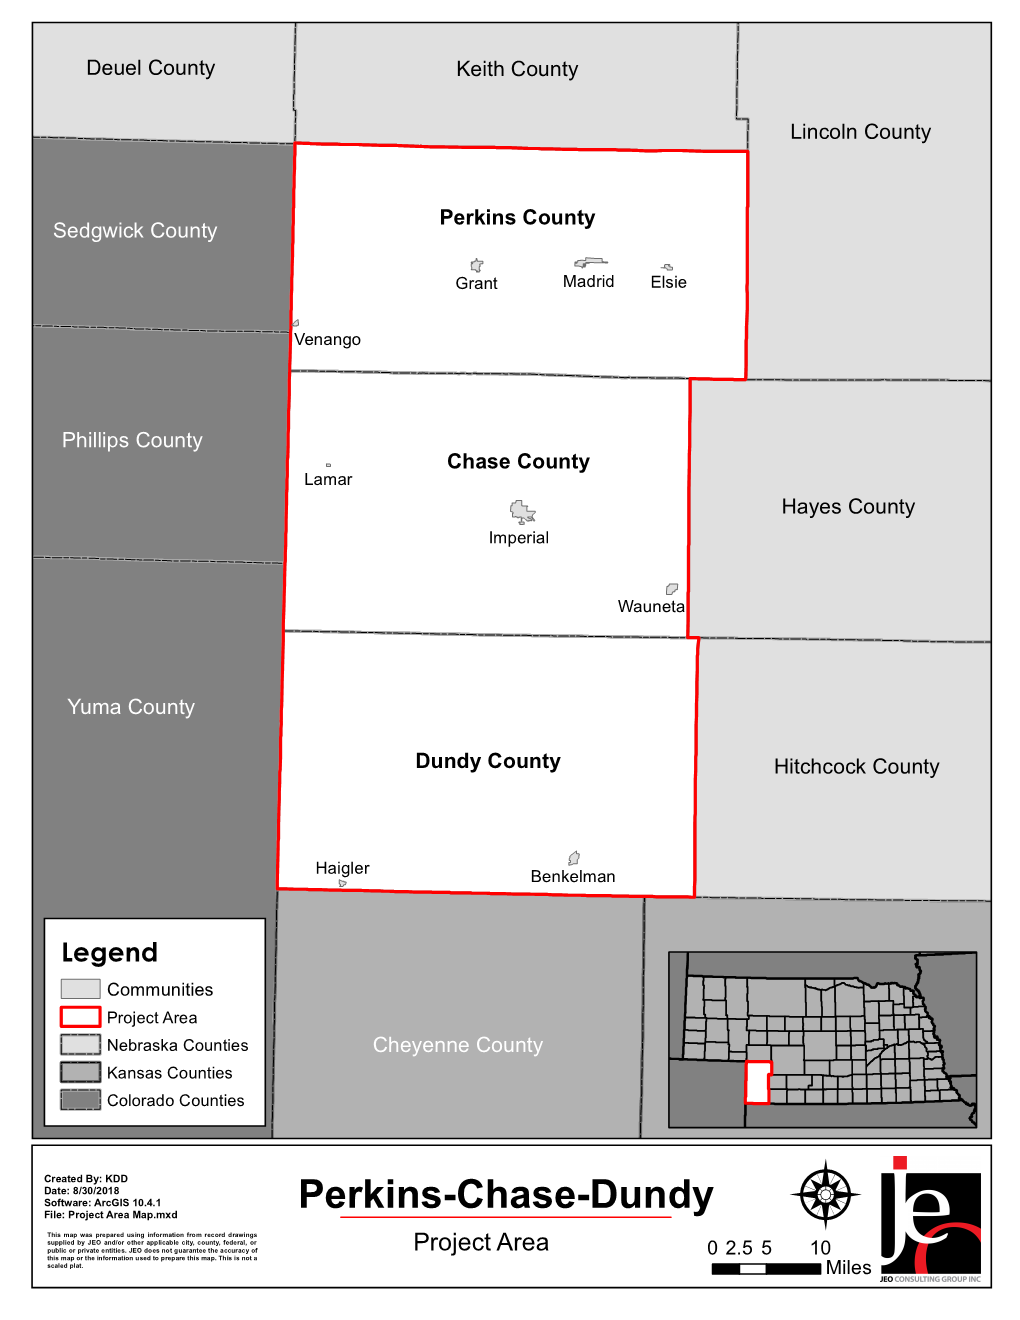 Perkins, Chase, and Dundy Counties Planning Area